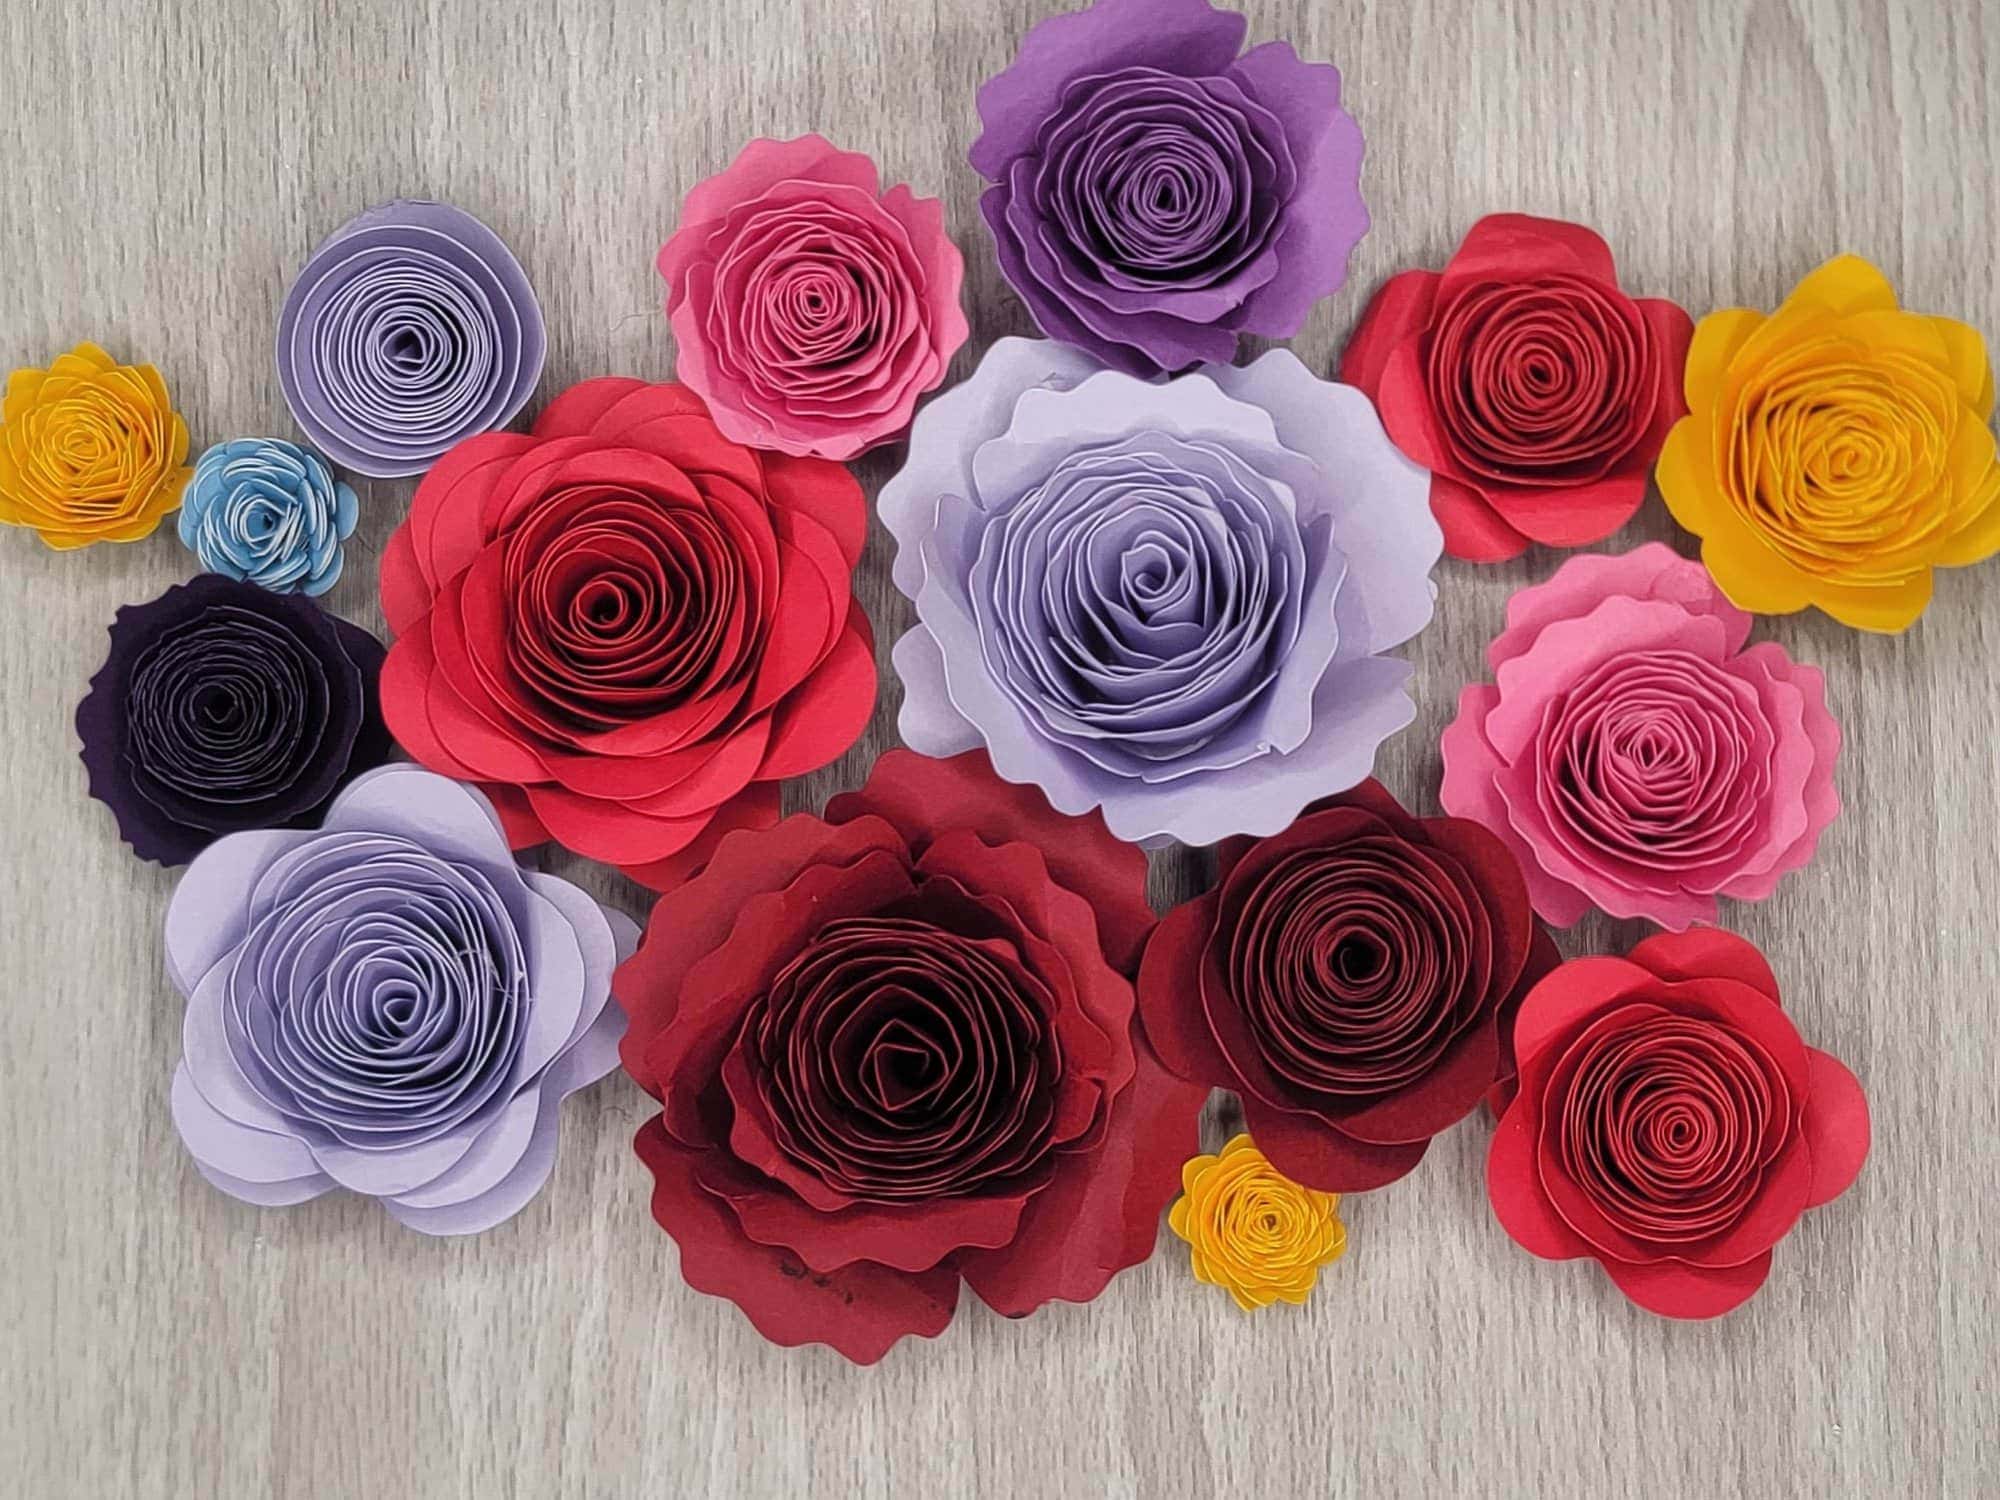 How To Make A Cricut Paper Flower Free Flower Templates And A Video Analytical Mommy Llc